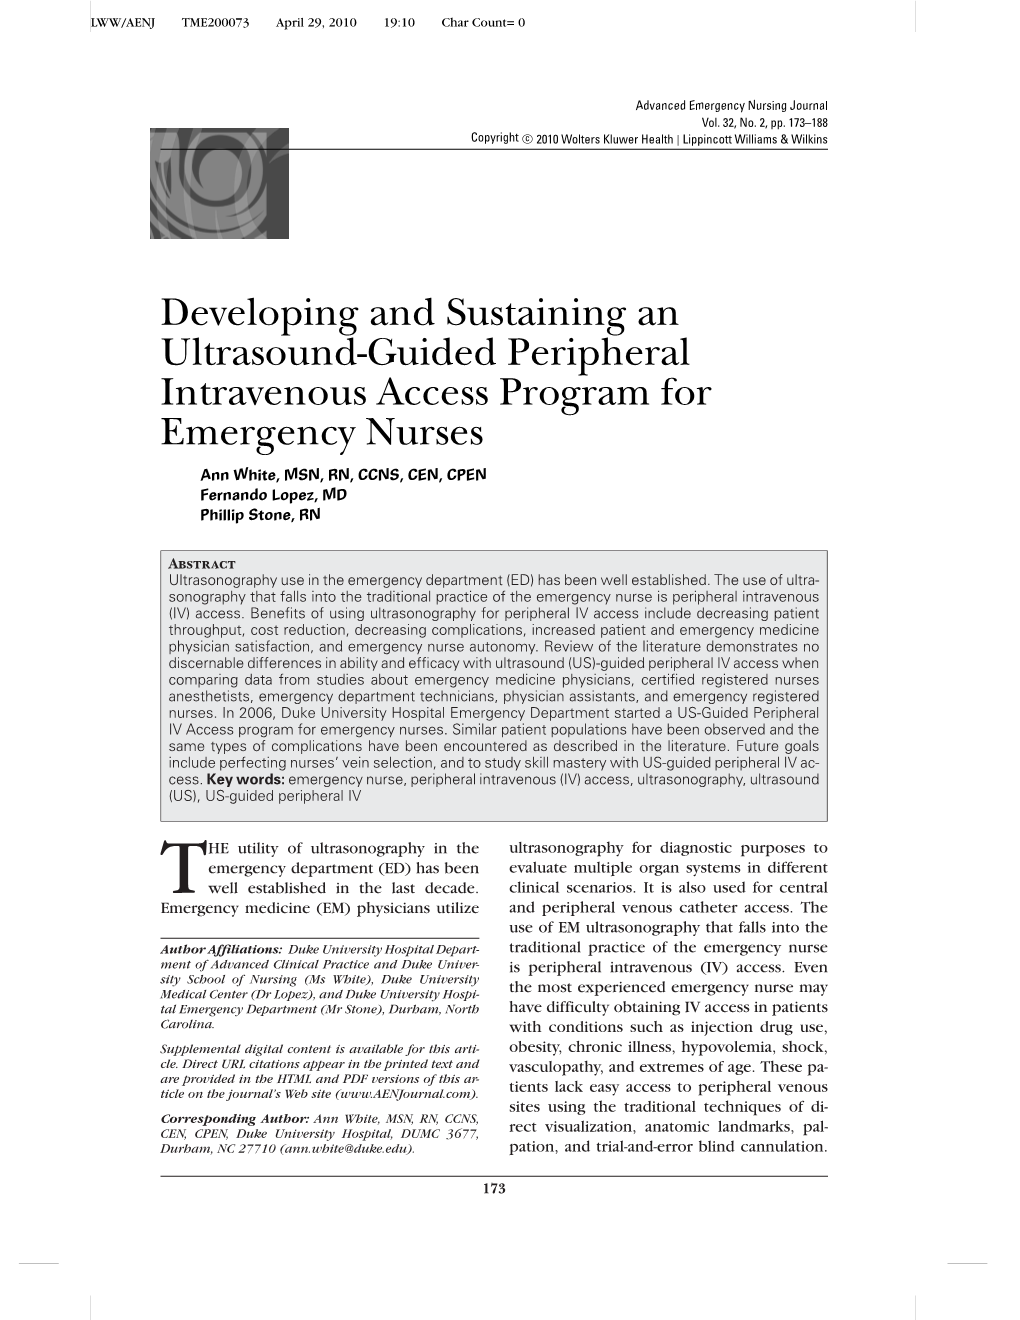 Developing and Sustaining an Ultrasound-Guided Peripheral